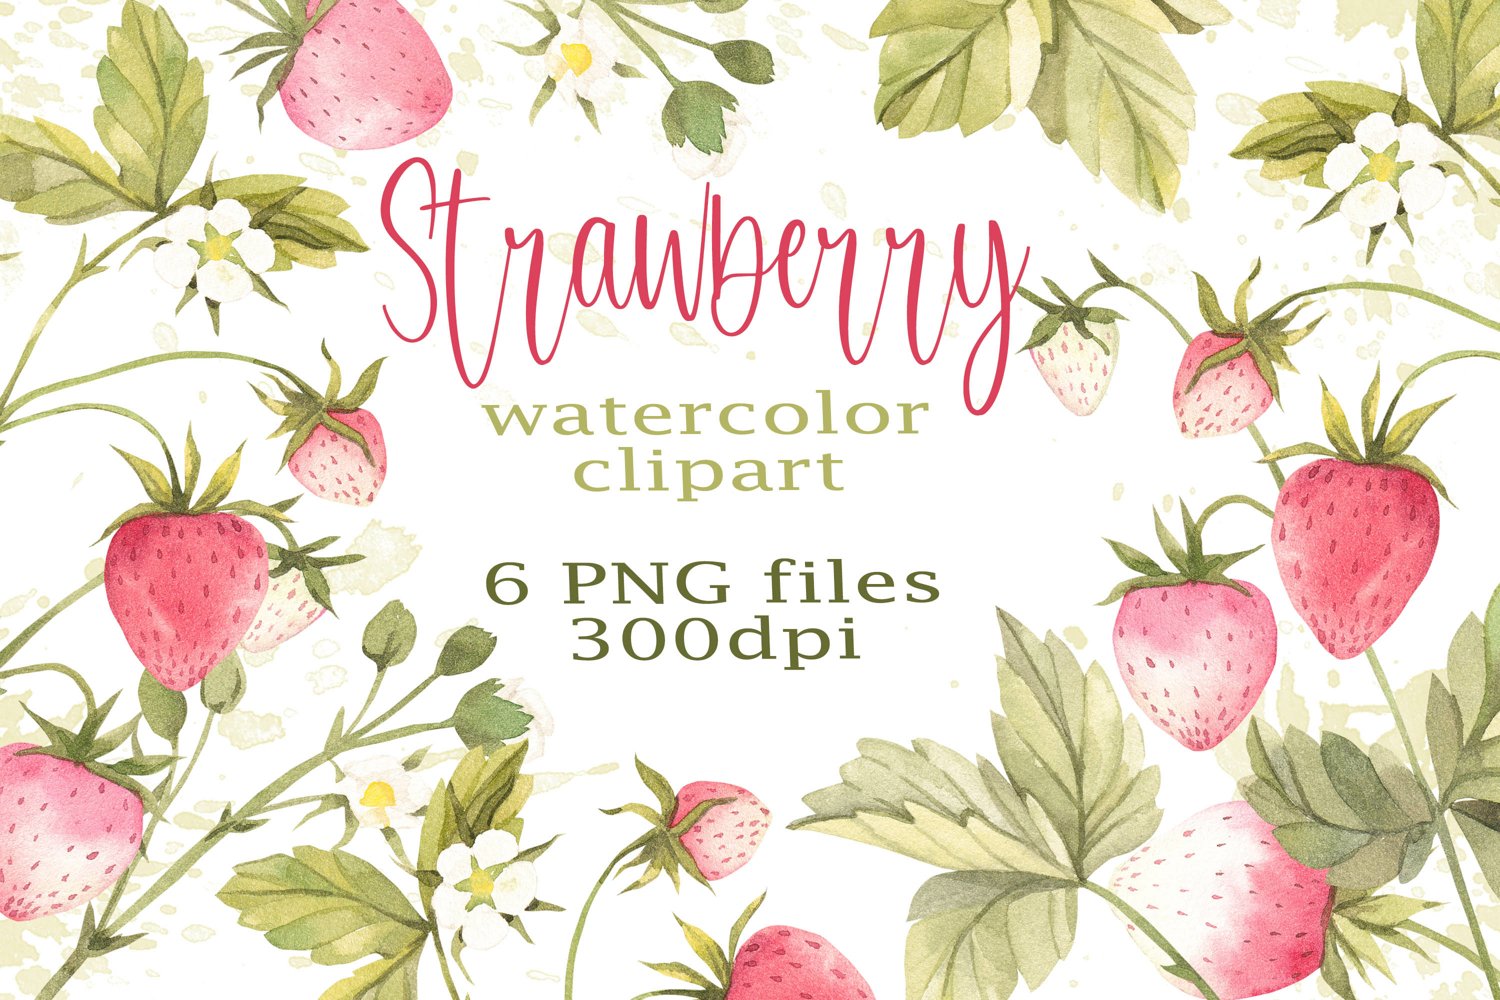 Cover image of Watercolor set of strawberries.